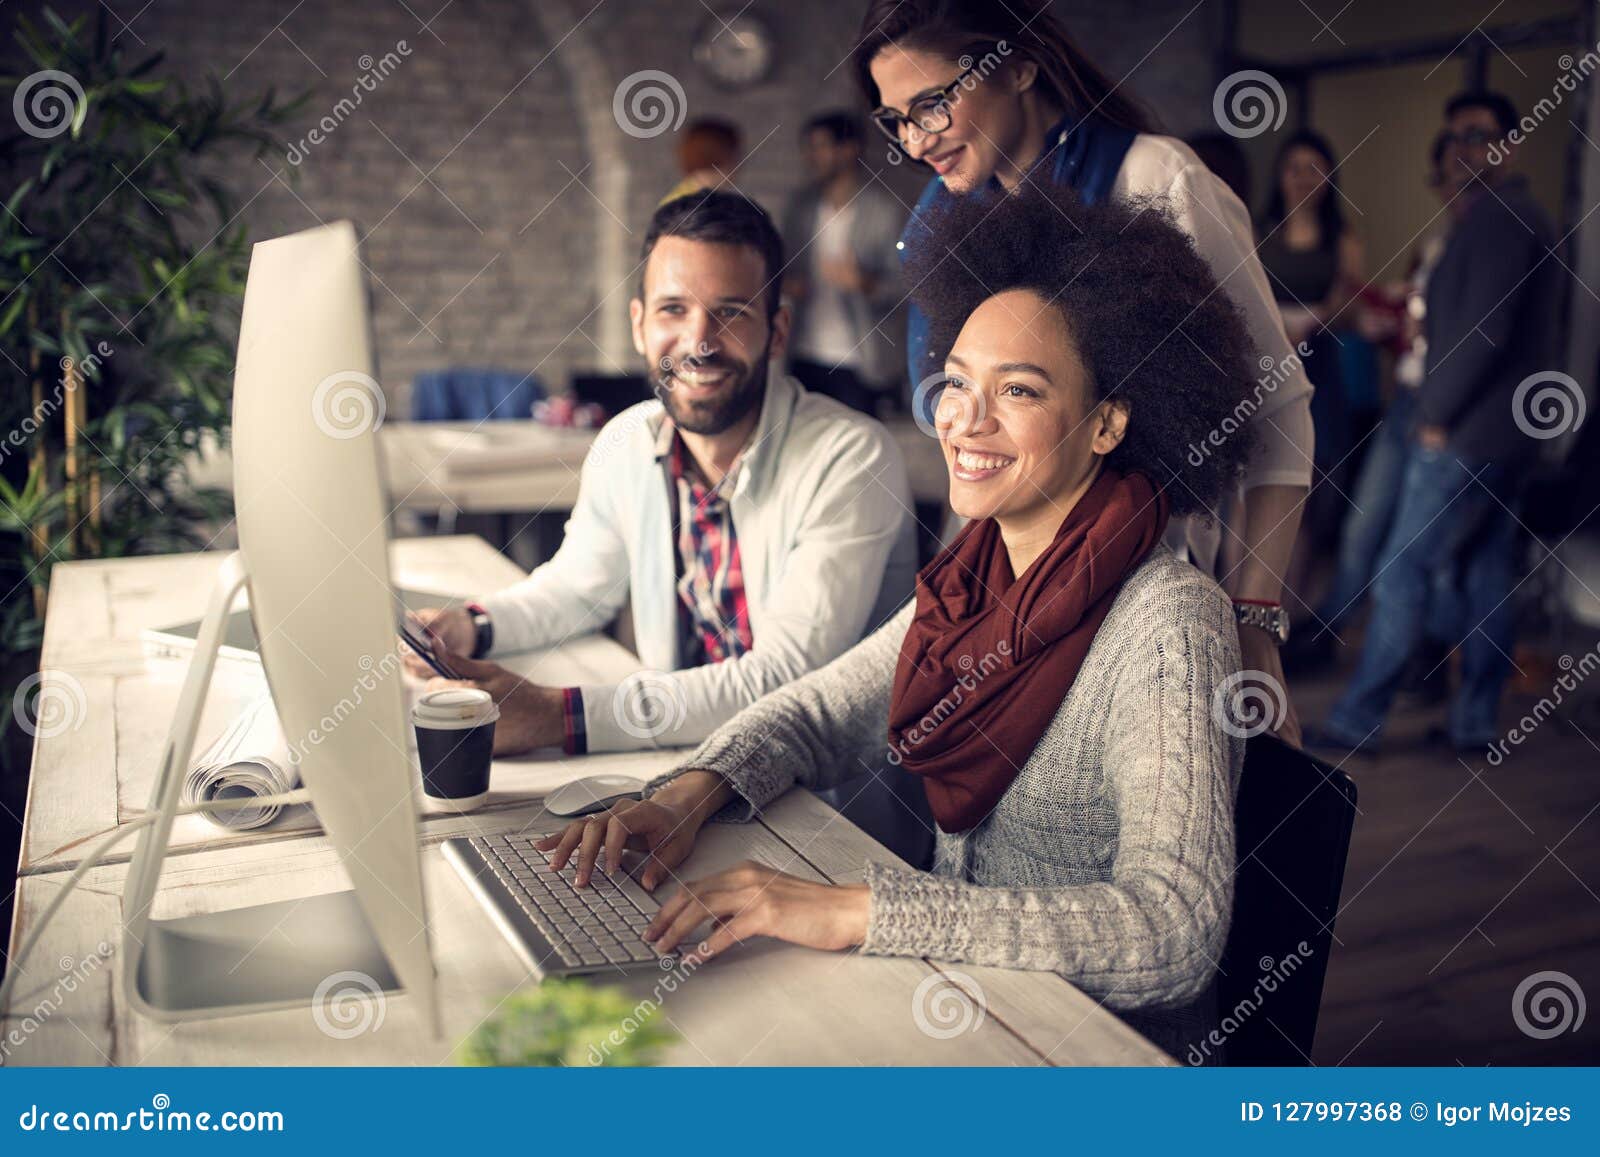 employed woman at computer in office